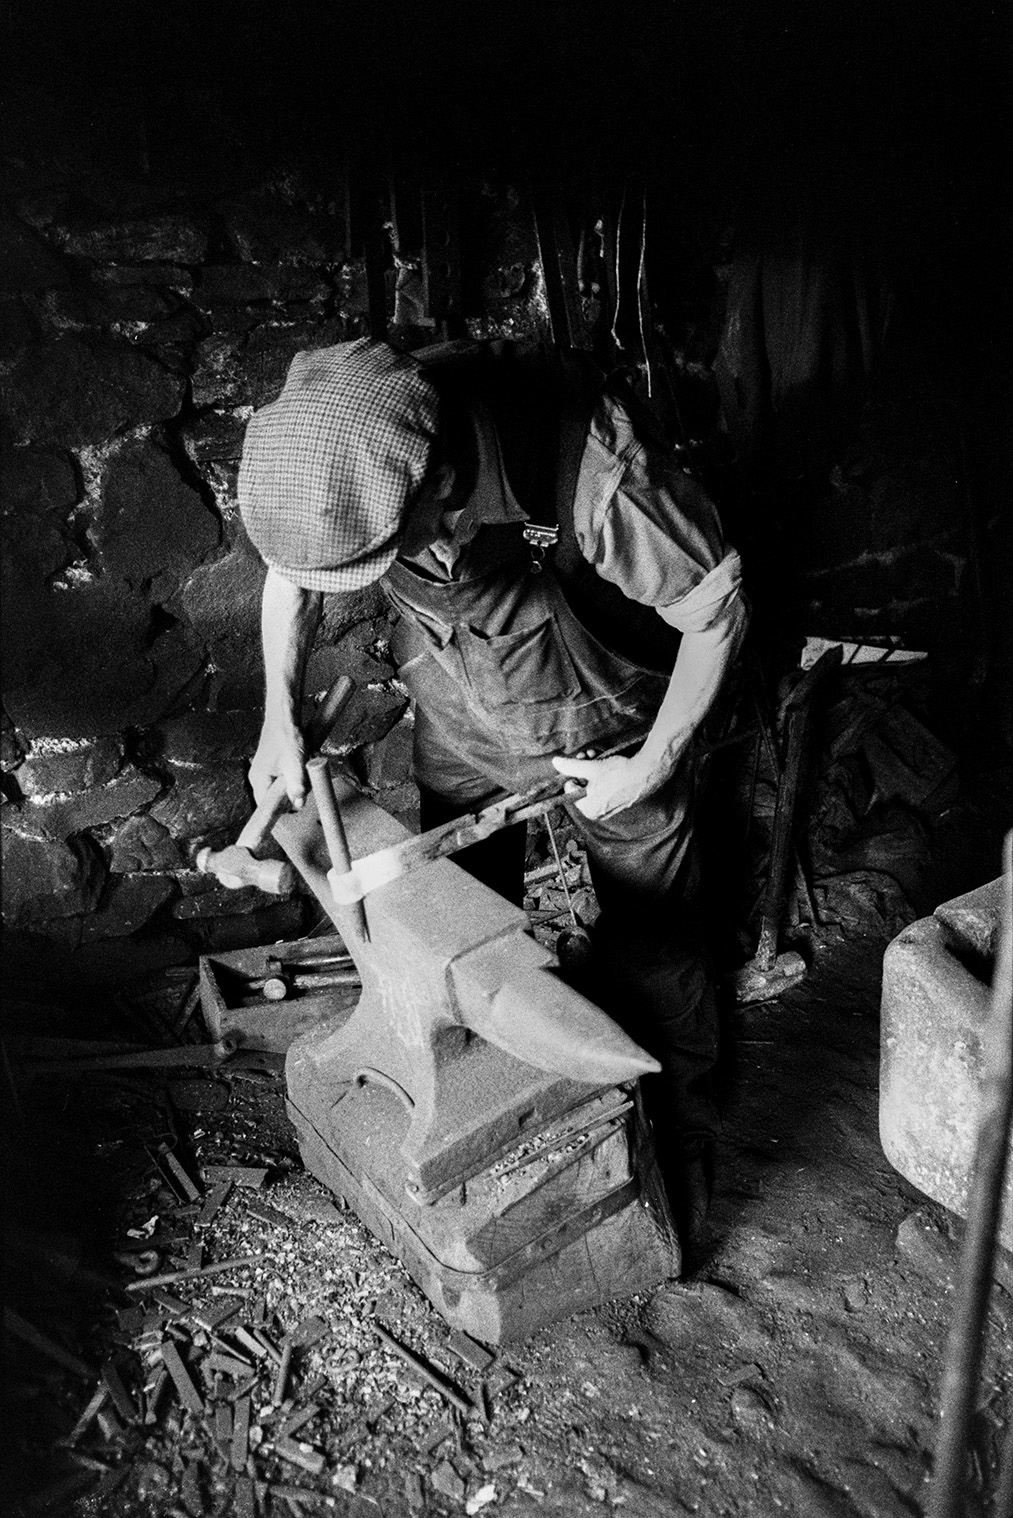 Mr Loosemore, a Blacksmith, working in his forge at Atherington to make hinges for wooden farm gates. He is beating a piece of heated metal over an anvil.